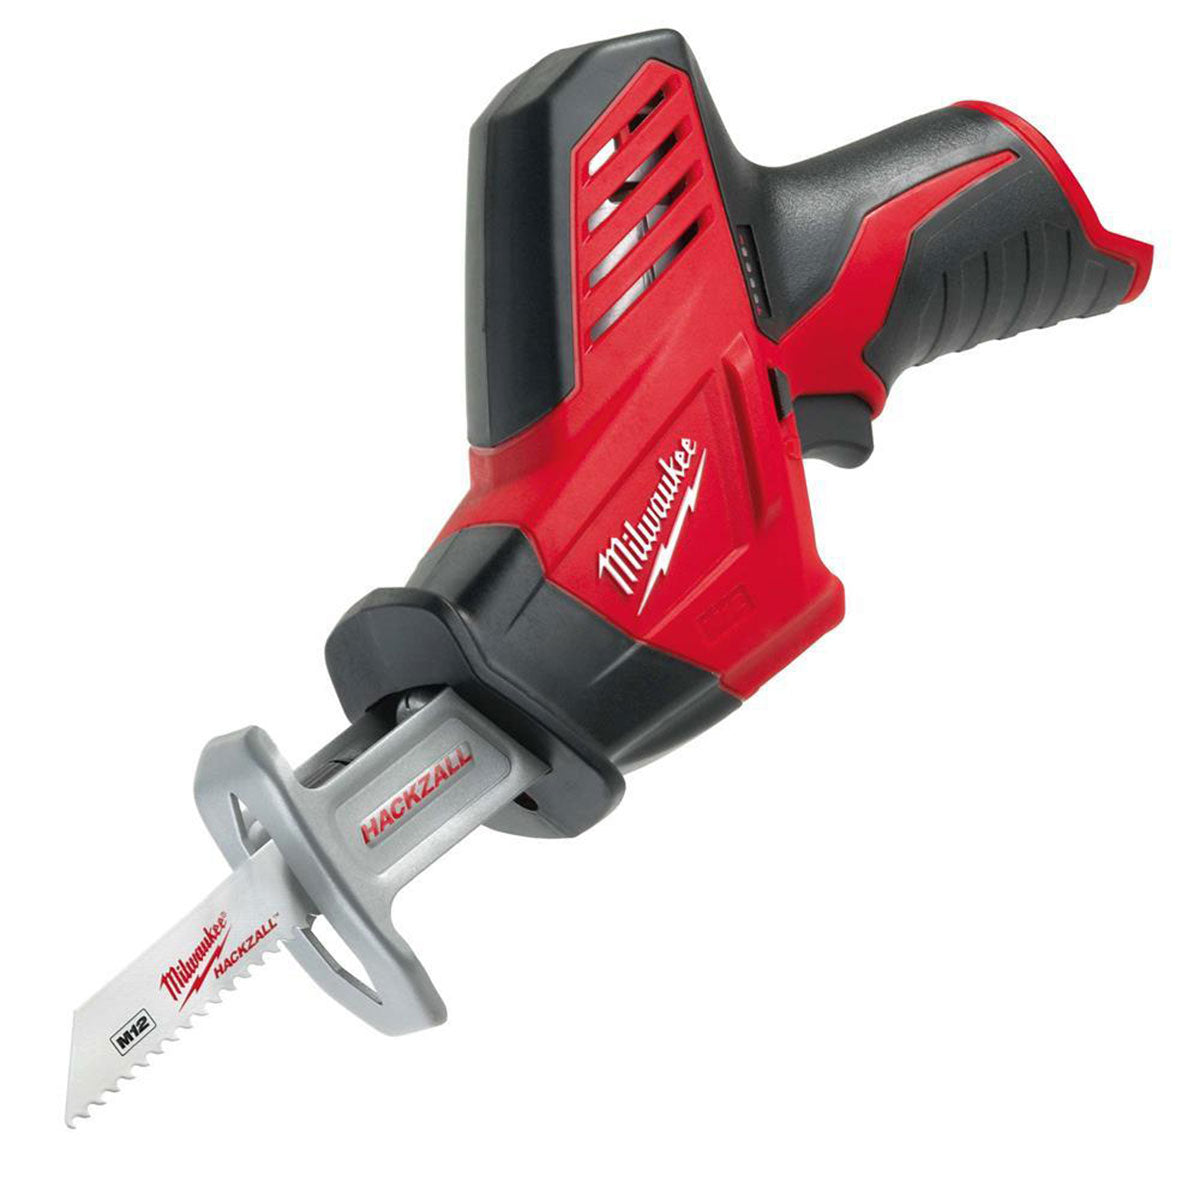 Milwaukee M12 C12HZ-0 12V Compact Hackzall Reciprocating Saw Body Only 4933411925